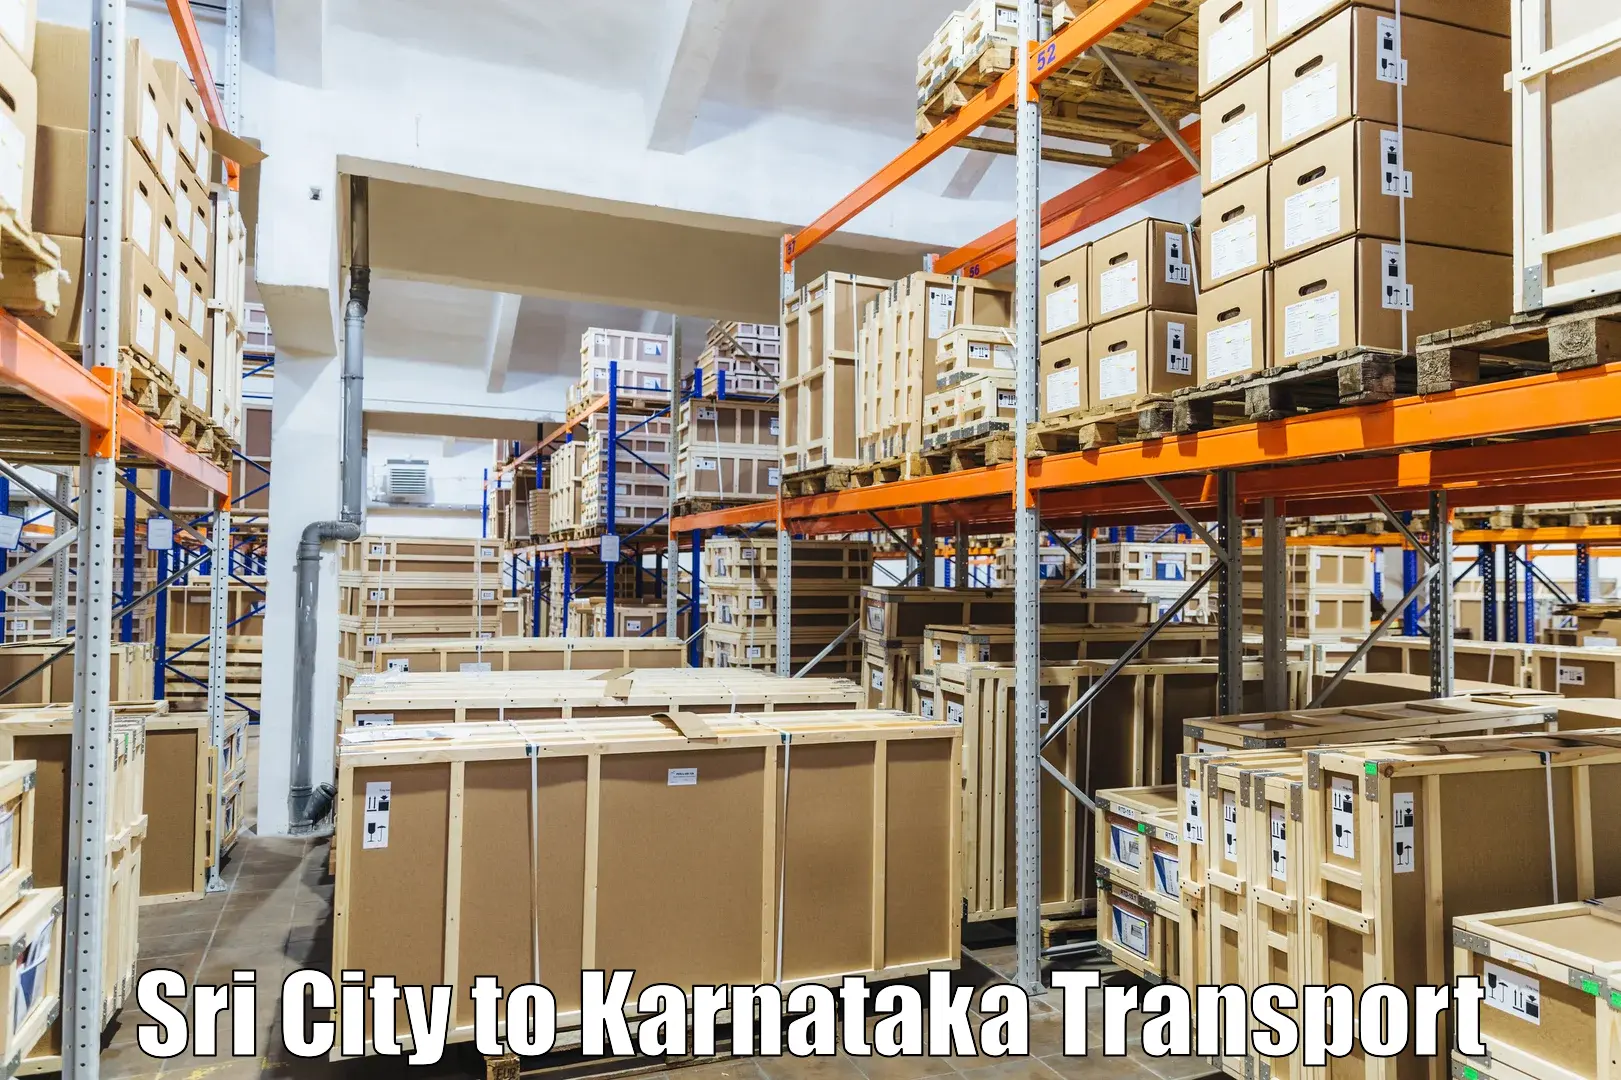 Domestic goods transportation services in Sri City to Shorapur